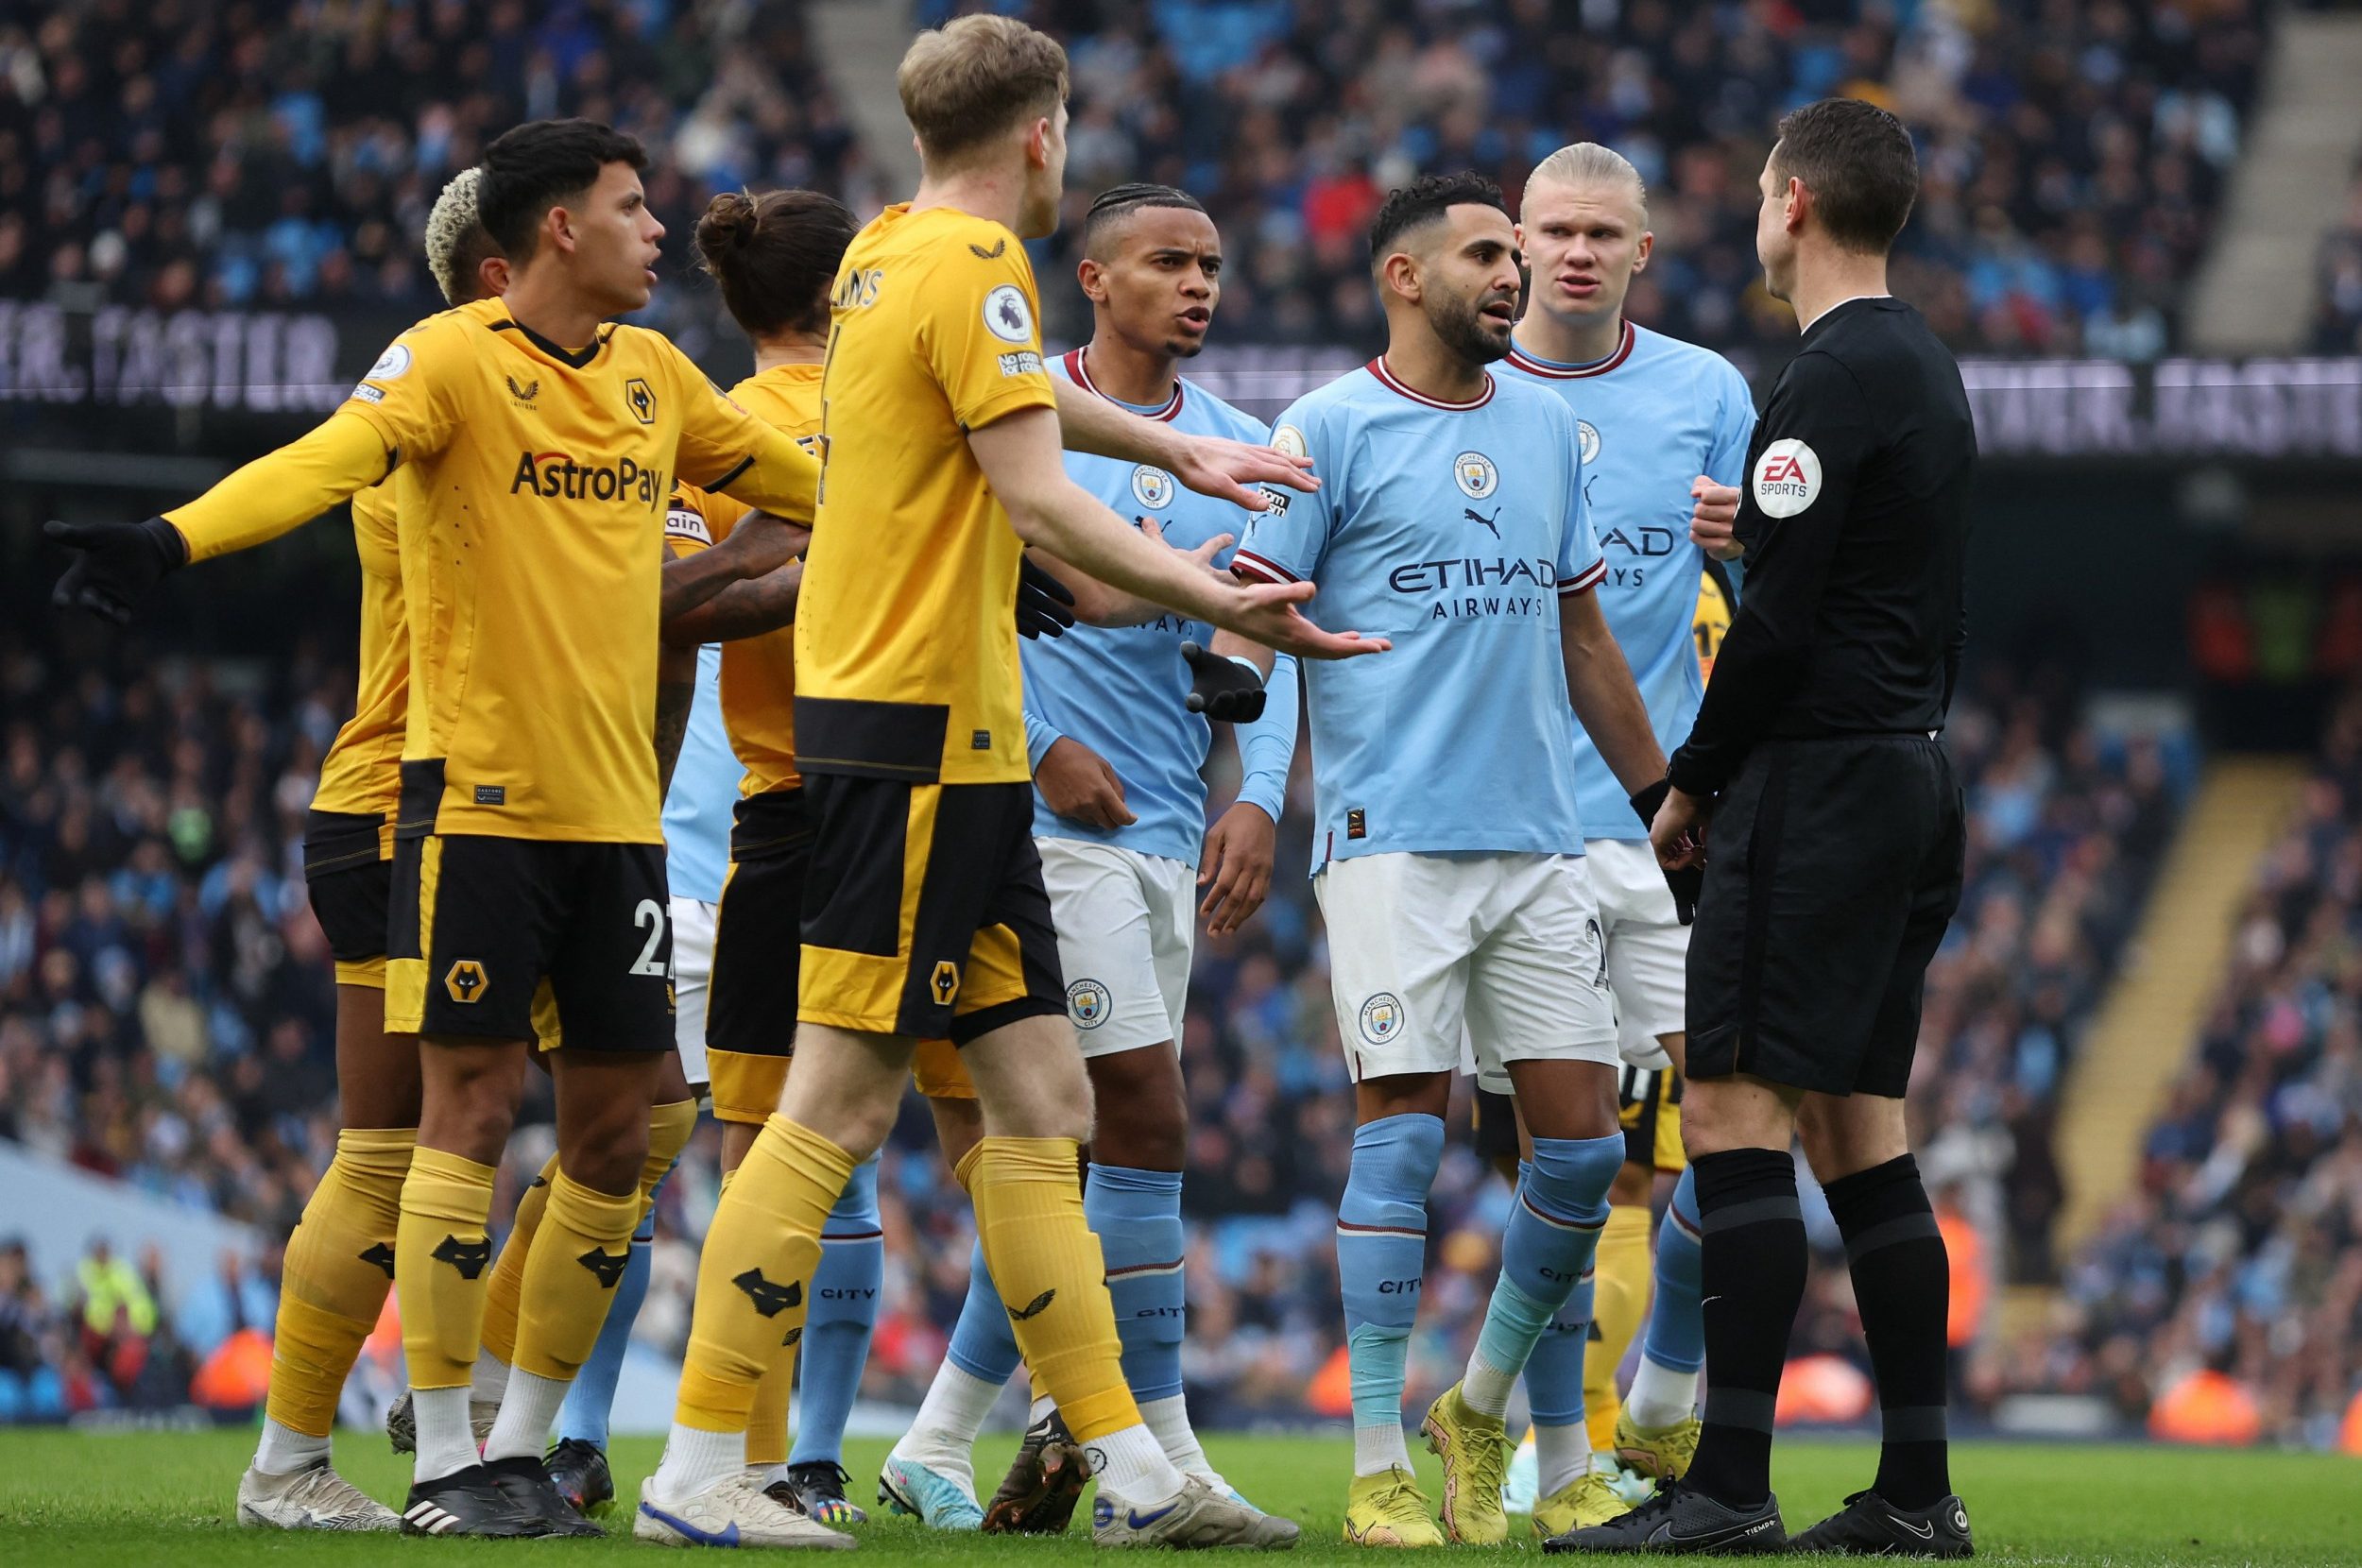 Watch Wolverhampton Wanderers vs Manchester City Live Stream, How To Watch Premier League Round 7 Live TV Info Worldwide